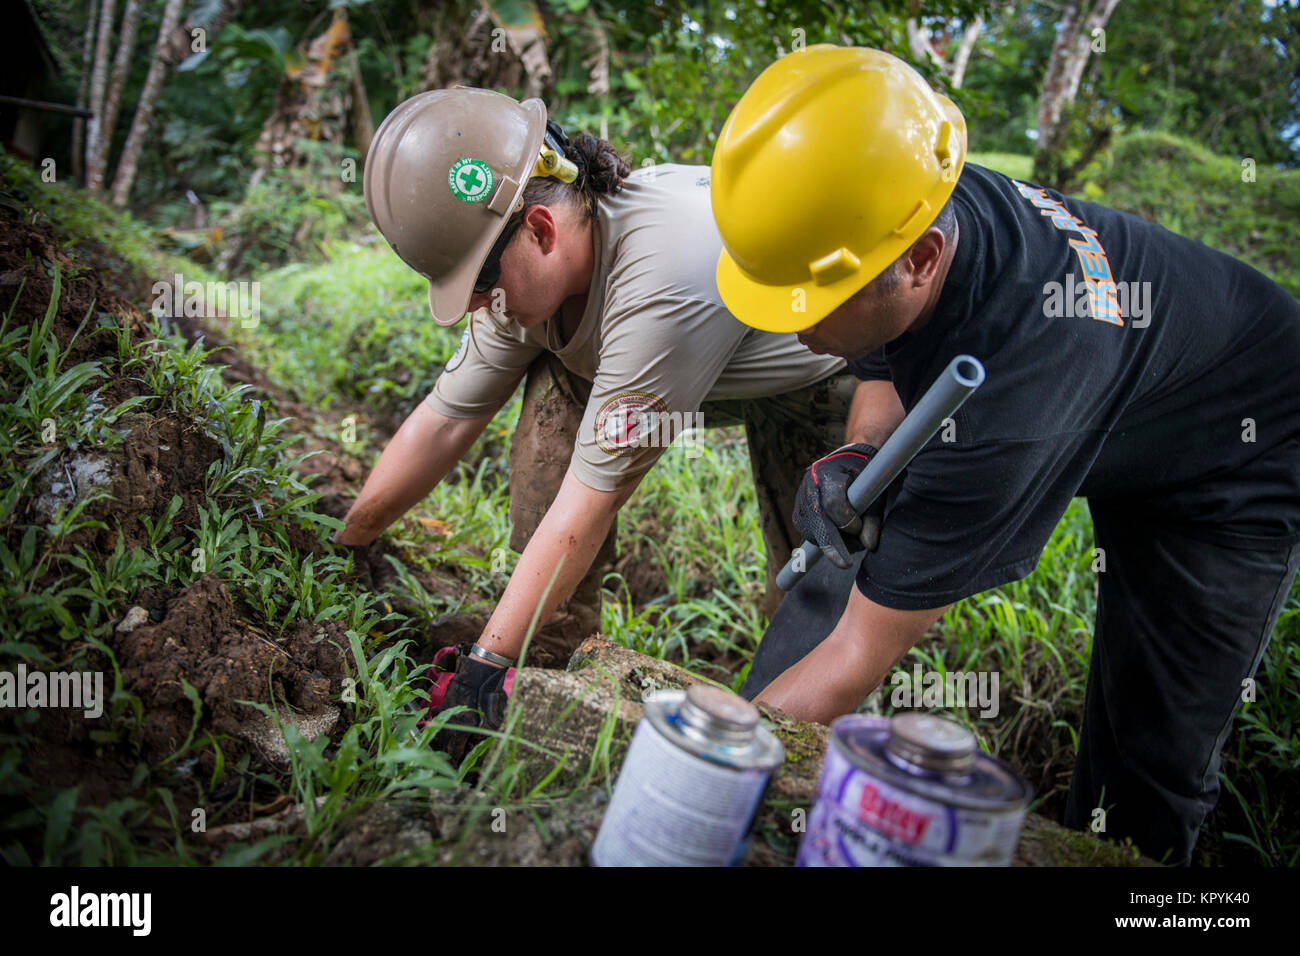 U.S. Navy Utilitiesman 1st Class Mariah Stanton, left, assigned to Naval Mobile Construction Battalion (NMCB) 133 Civic Action Team (CAT) Palau, and Roger Santos, a Palauan participating in the Apprentice Training Program, install a water catchment system at the Ngeremlengui Elementary School in Ibobang, Palau, December 13, 2017. NMCB-133 is forward deployed, providing expeditionary construction and engineering (combat service support) to include horizontal and vertical construction; maintenance and operation of expeditionary bases and facilities; tactical sustainment bridging, humanitarian as Stock Photo